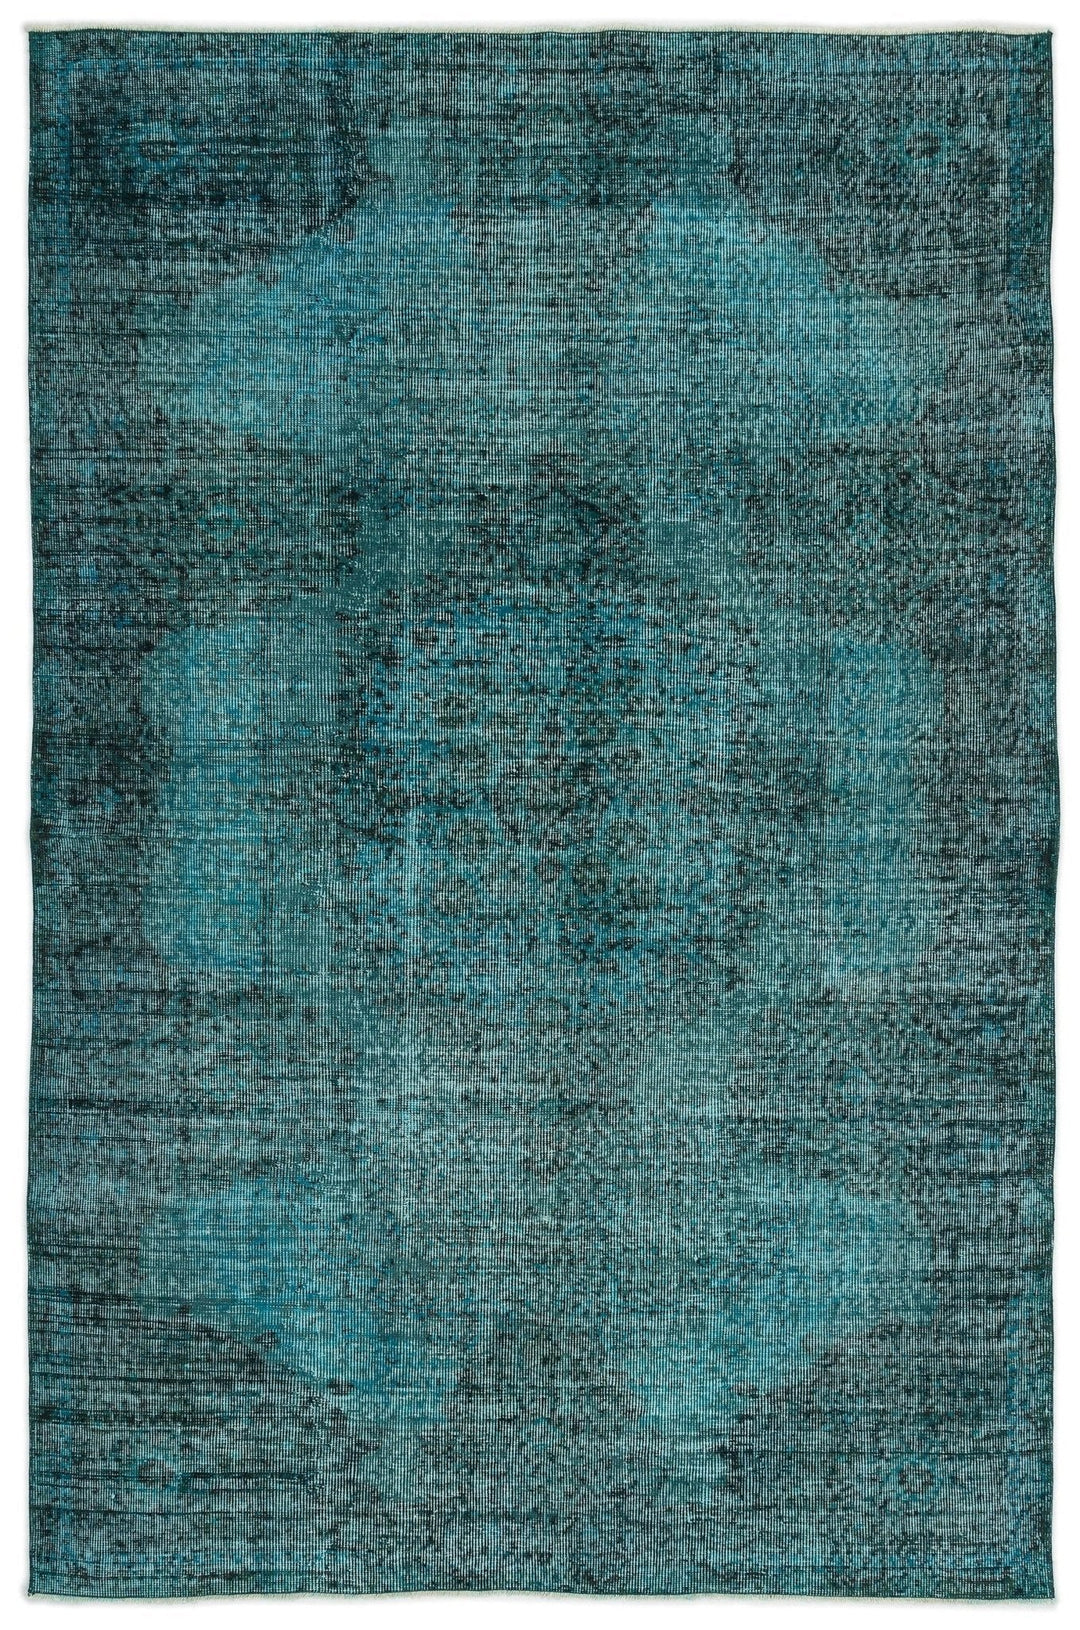 Athens 14990 Turquoise Tumbled Wool Hand Woven Carpet 178 x 265